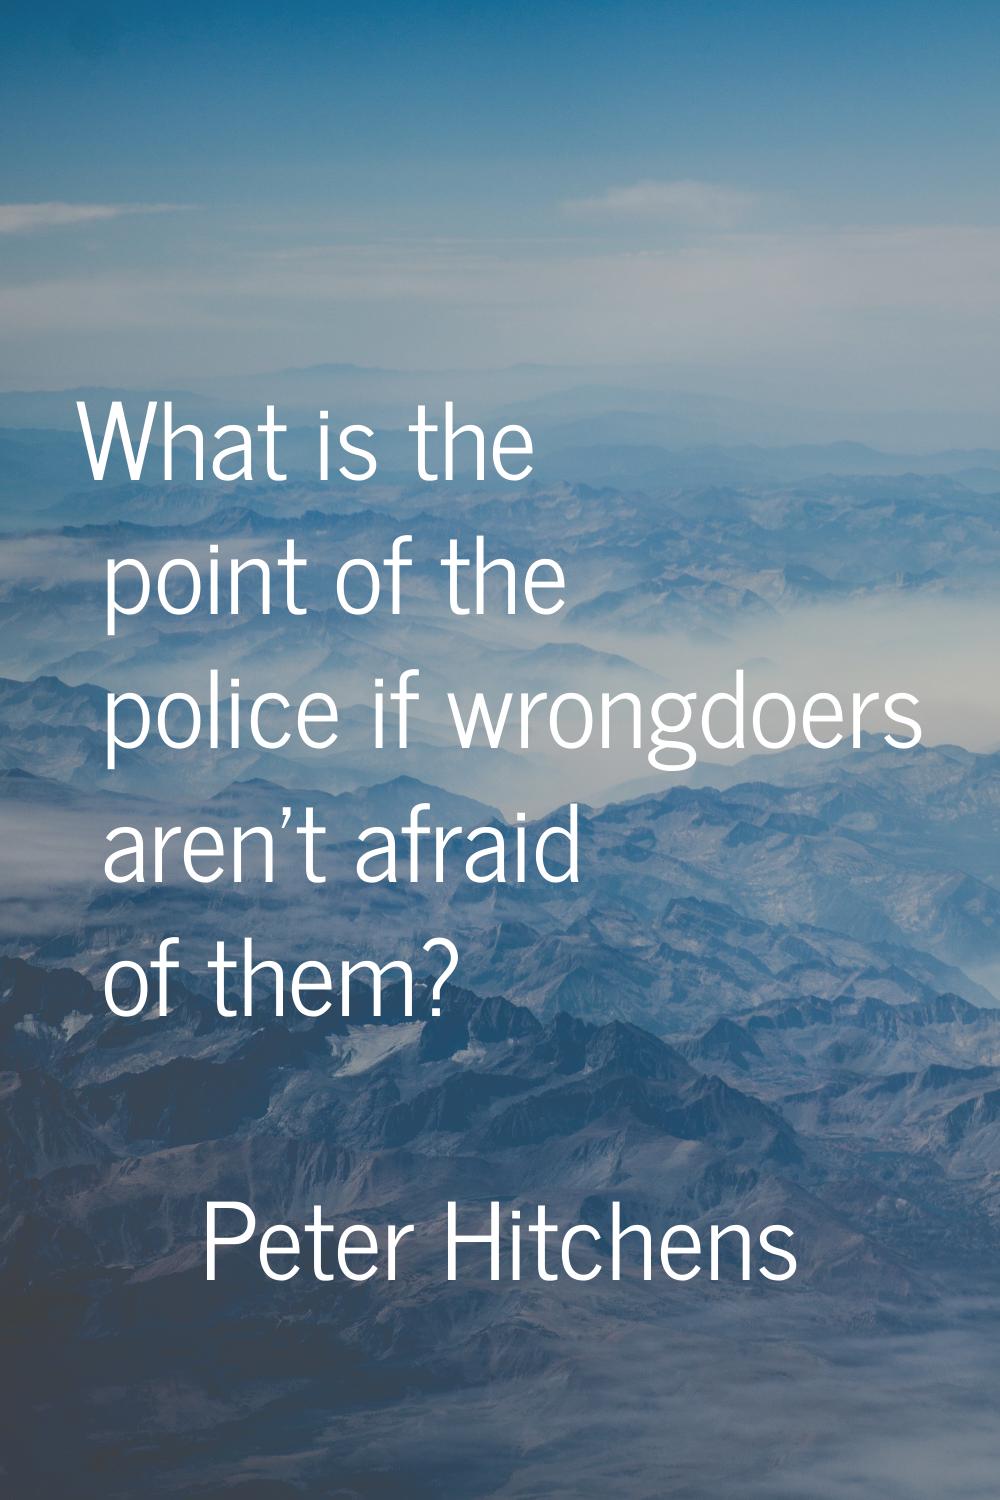 What is the point of the police if wrongdoers aren't afraid of them?